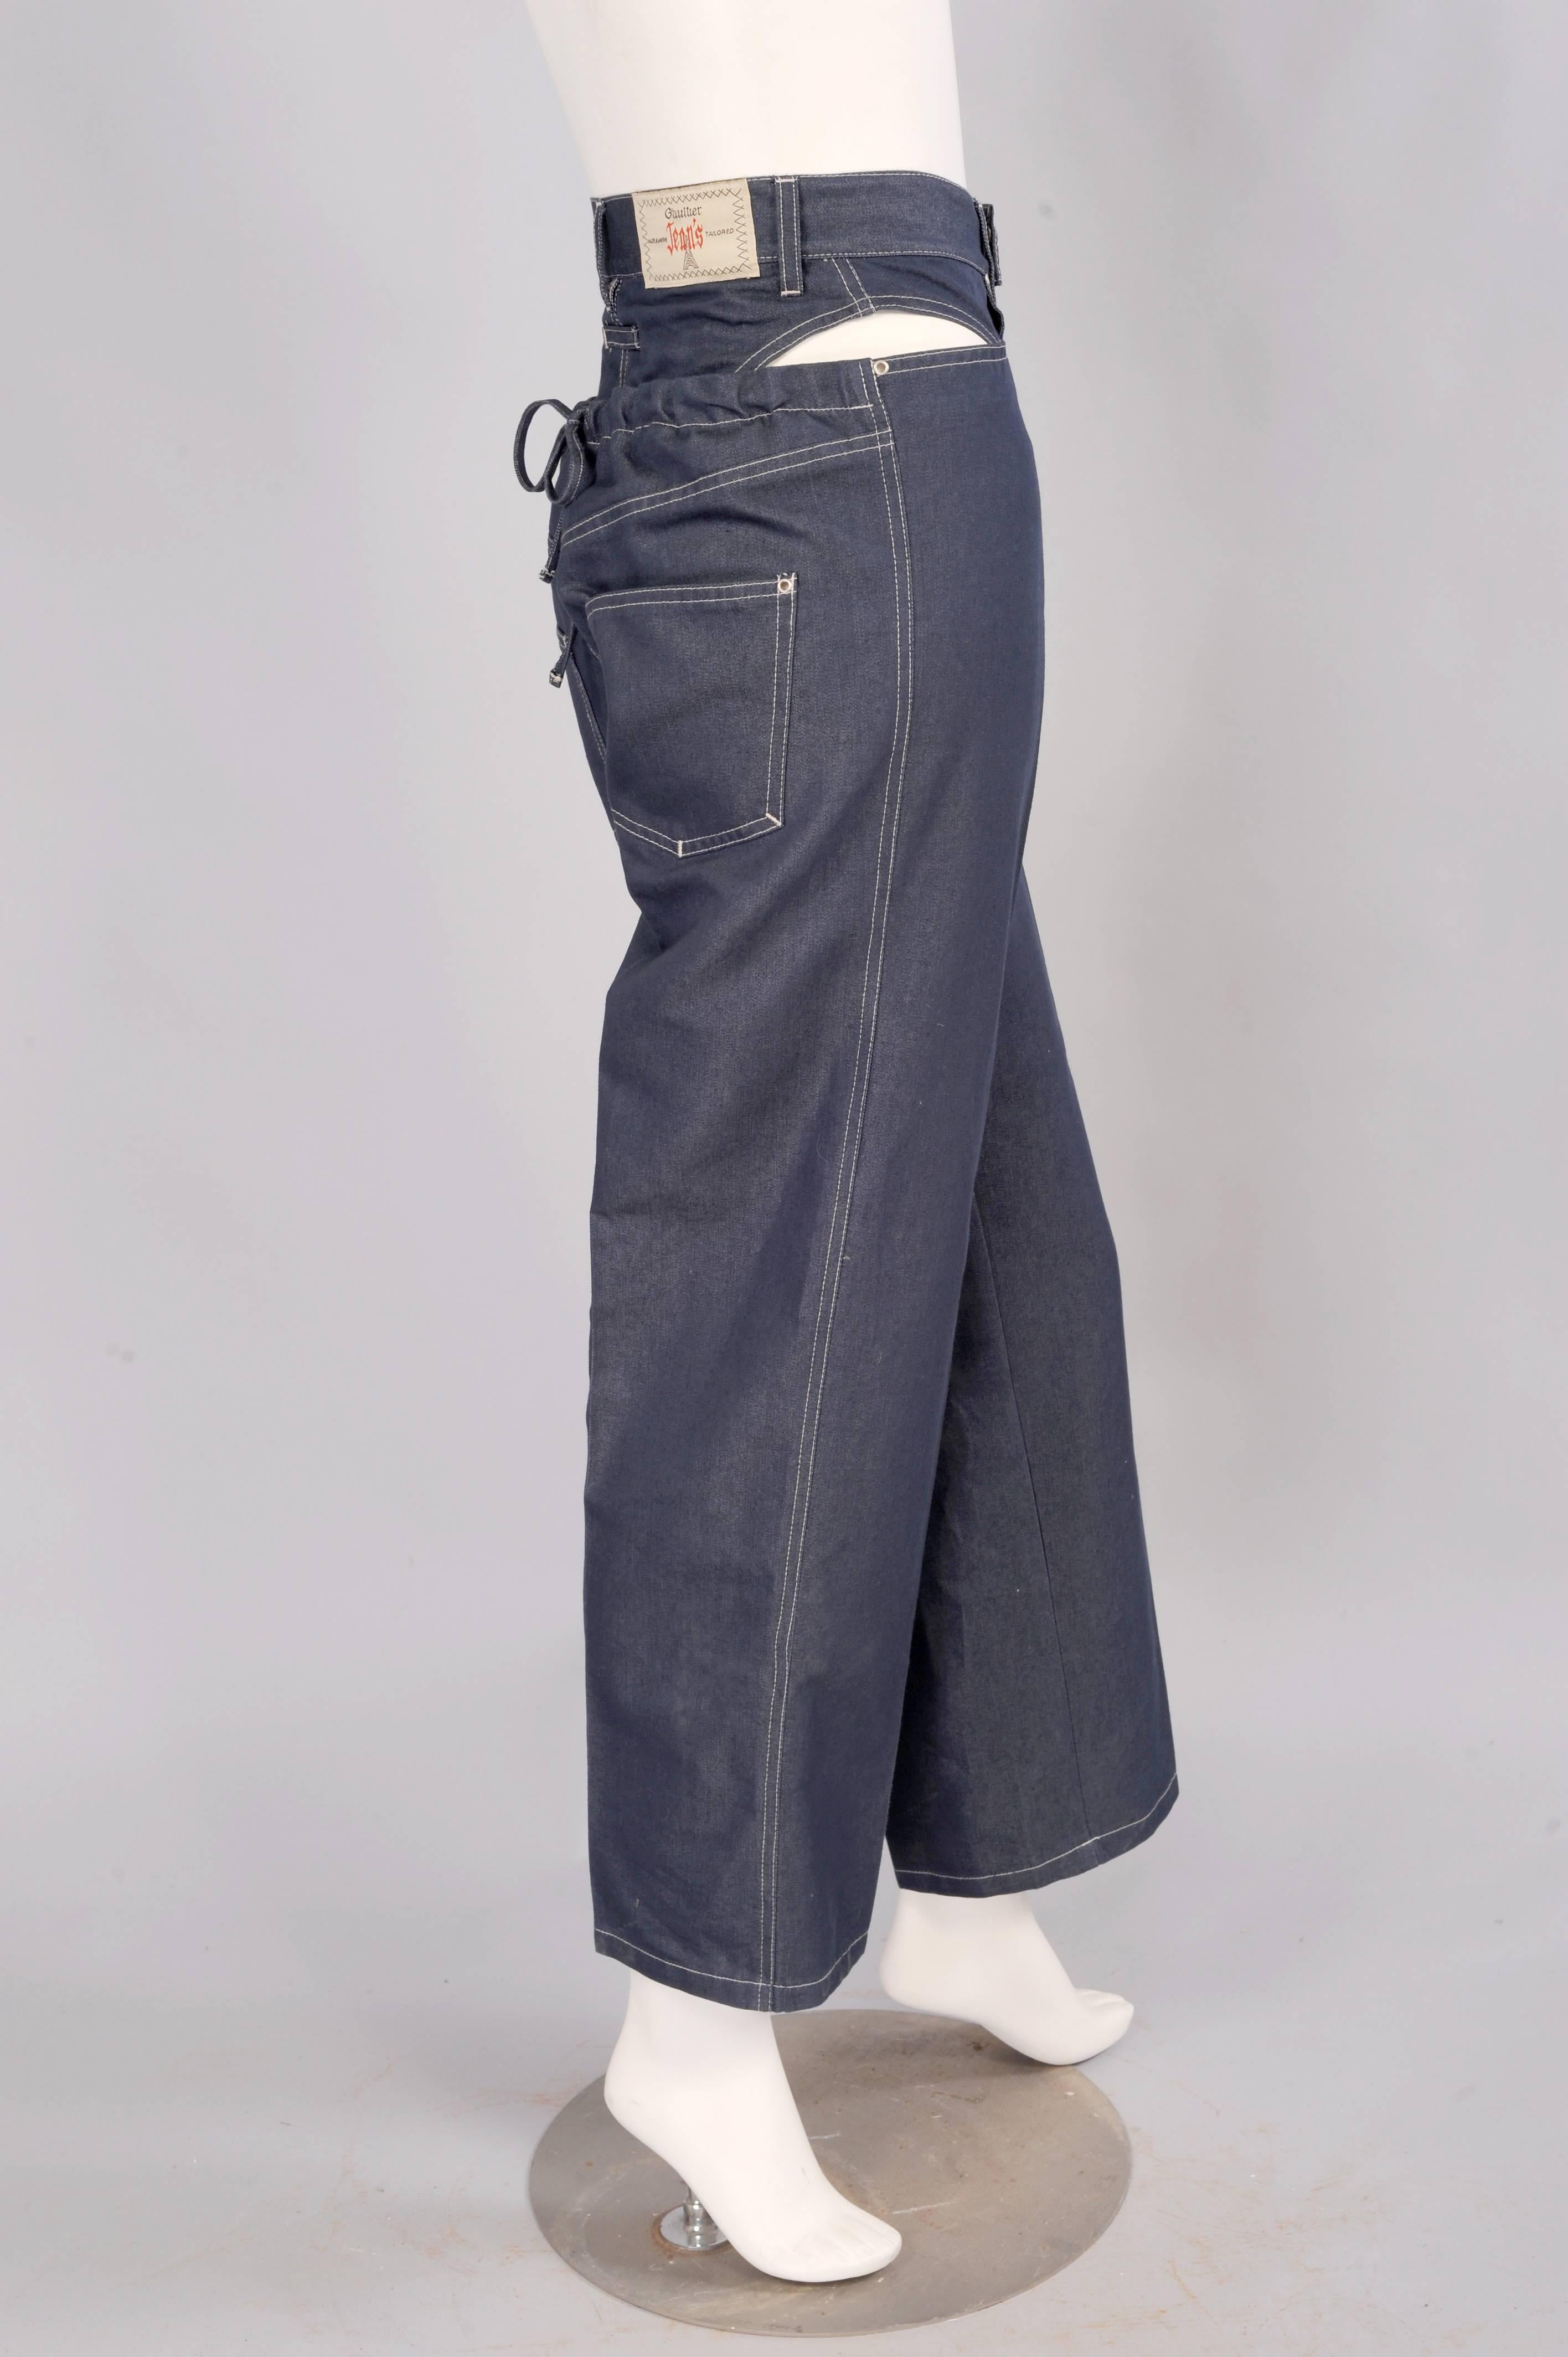 These straigh leg jeans are anything but straight laced. The classic style of the fly front jean is altered by removing the fabric over the hips and adding an almost separate bikini bottom. The back of the jeans are cut  low with a drawstring to